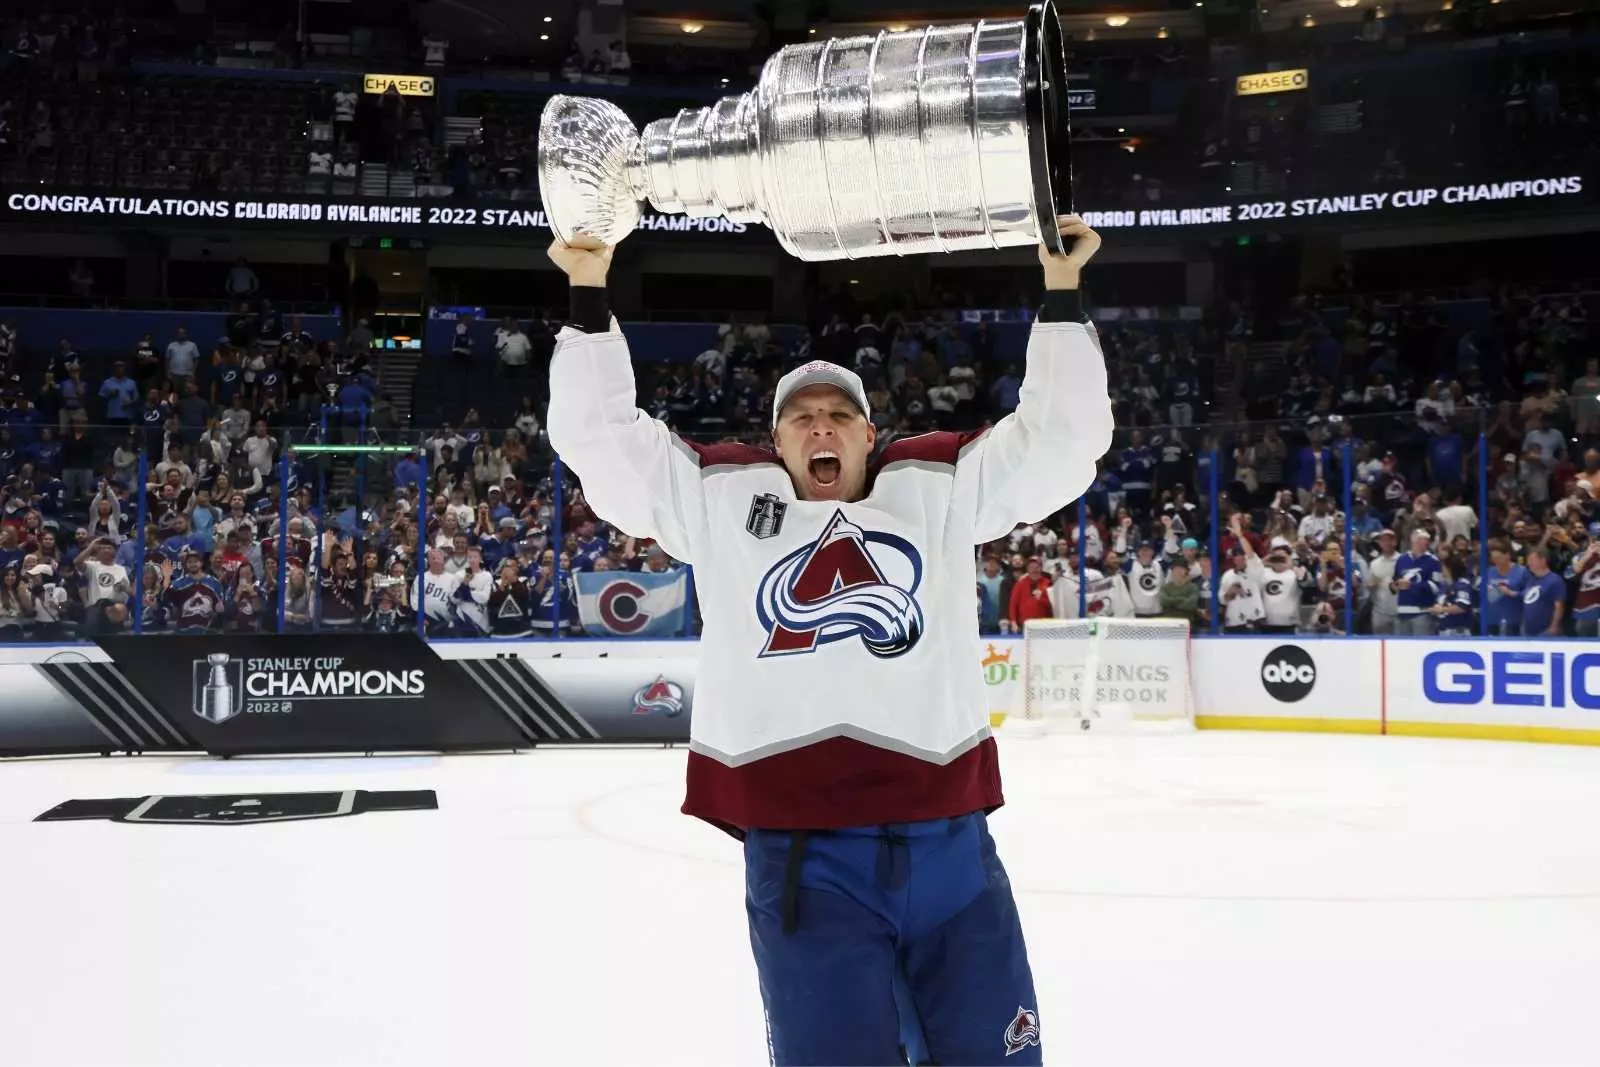 Avalanche Player Gets His Kids Loads of Ice Cream in Stanley Cup